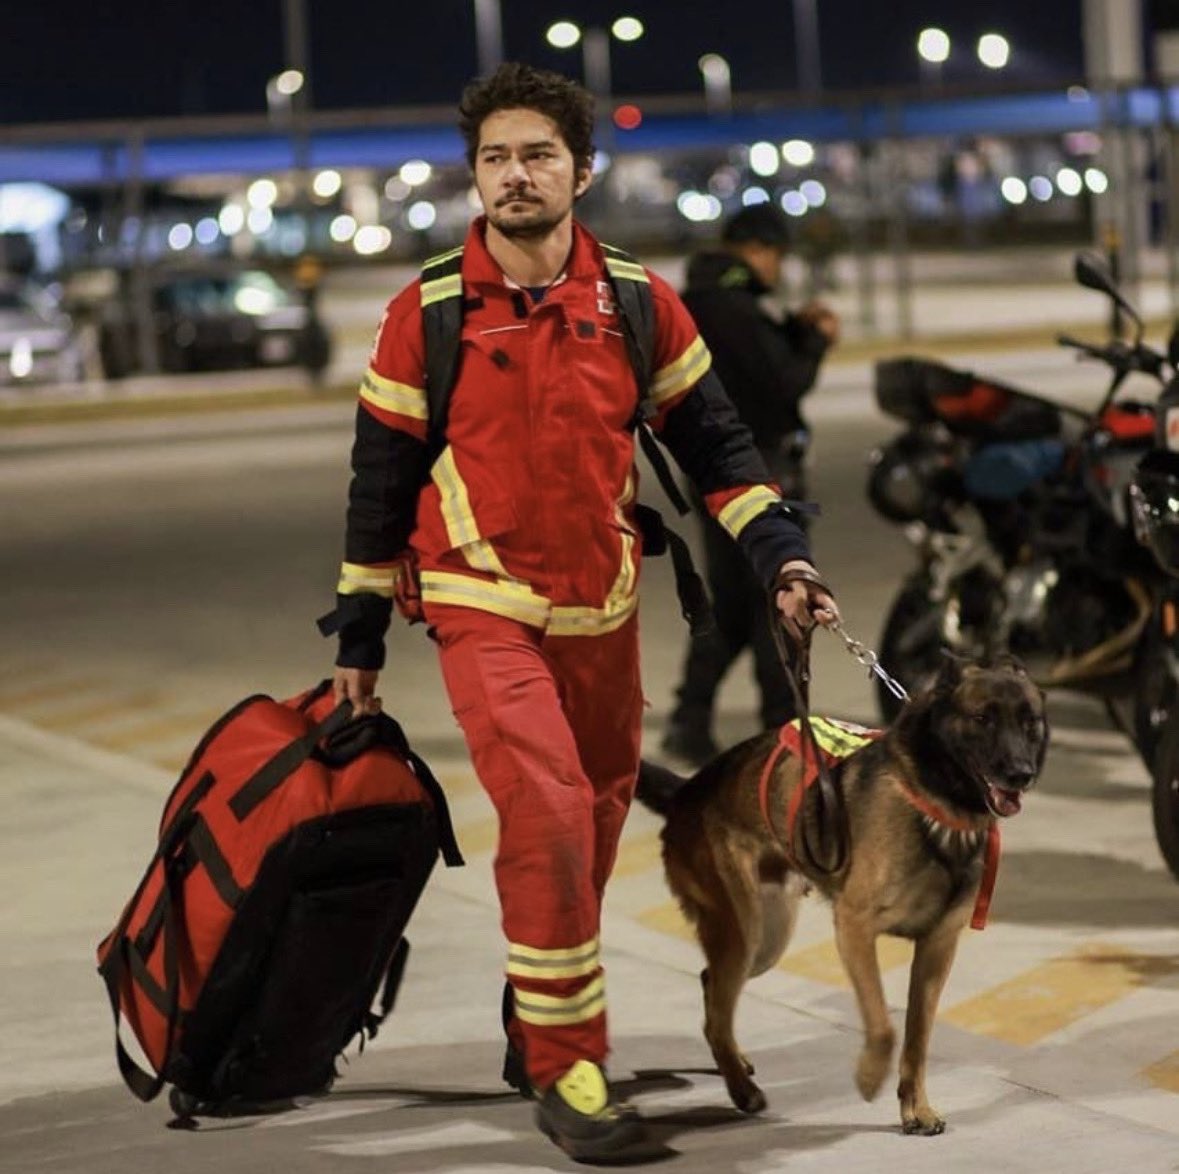 a member of the Red Cross wears a reflective, red uniform pulls a large red and black bag with his right hand, and the leash of a belgian malinois in his left hand. the dog walks with his handler across a parking lot.